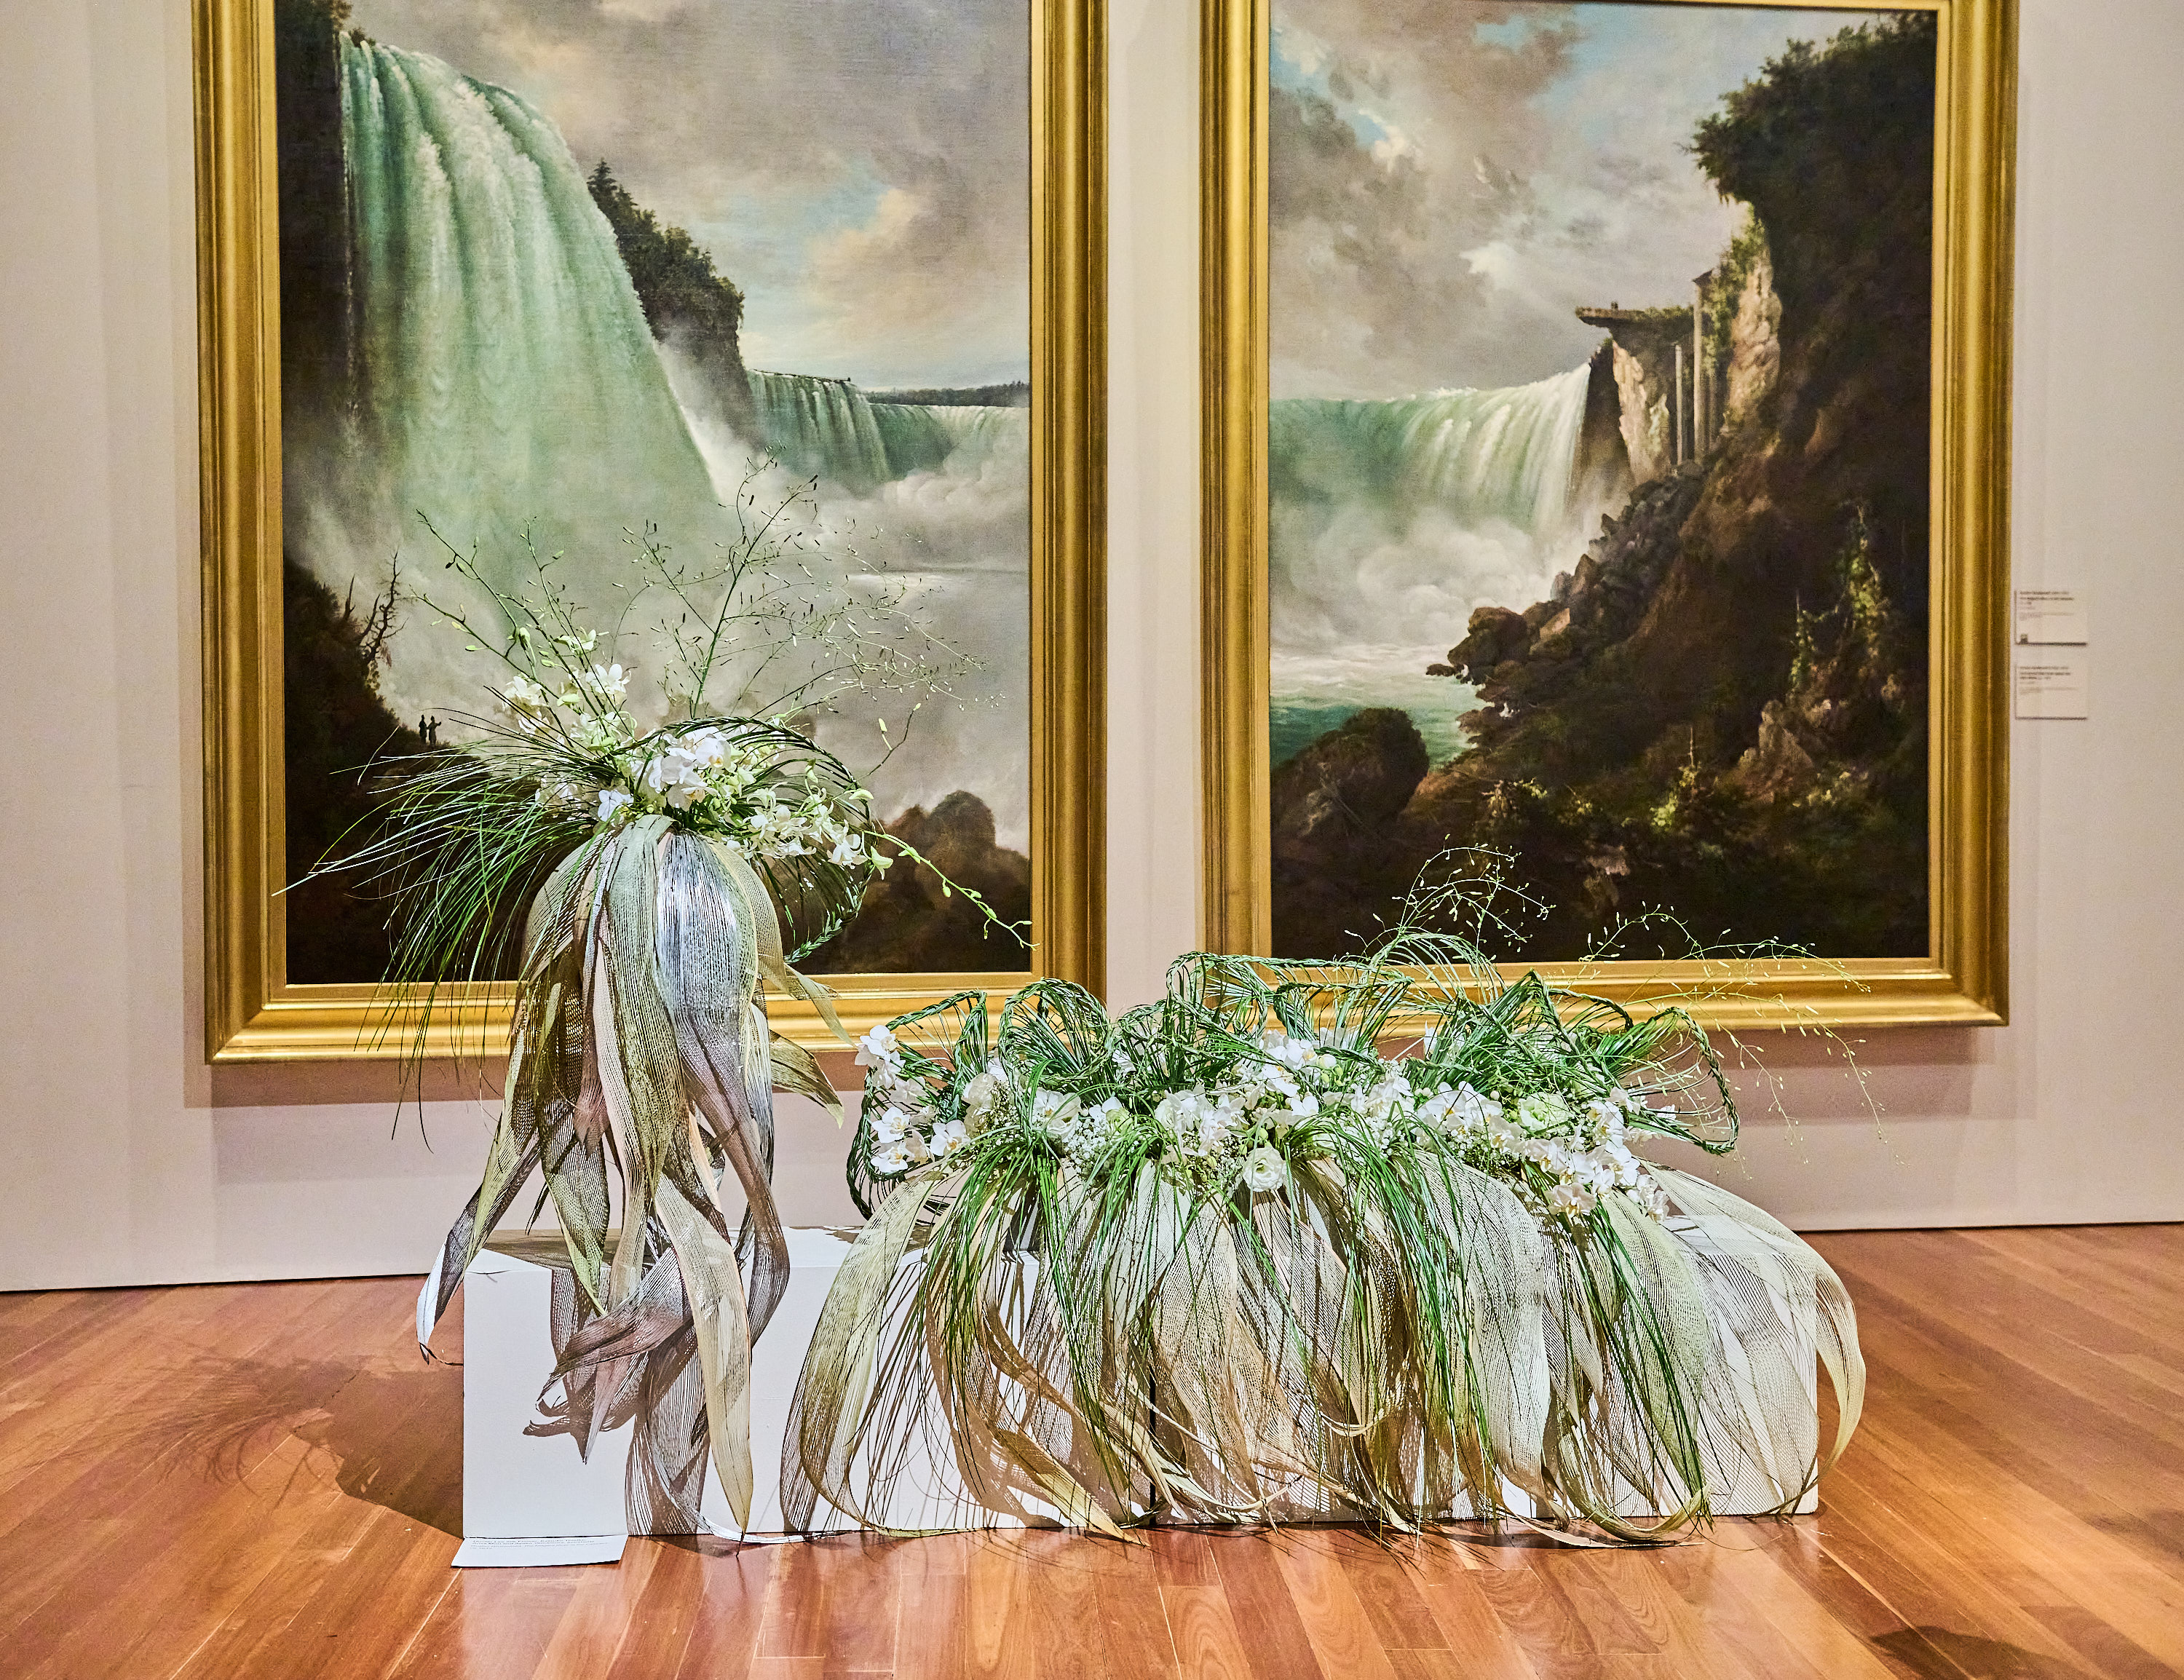 Two large paintings of waterfalls in gold frames are displayed on a wall. In front are two elaborate, contemporary floral arrangements on white pedestals.